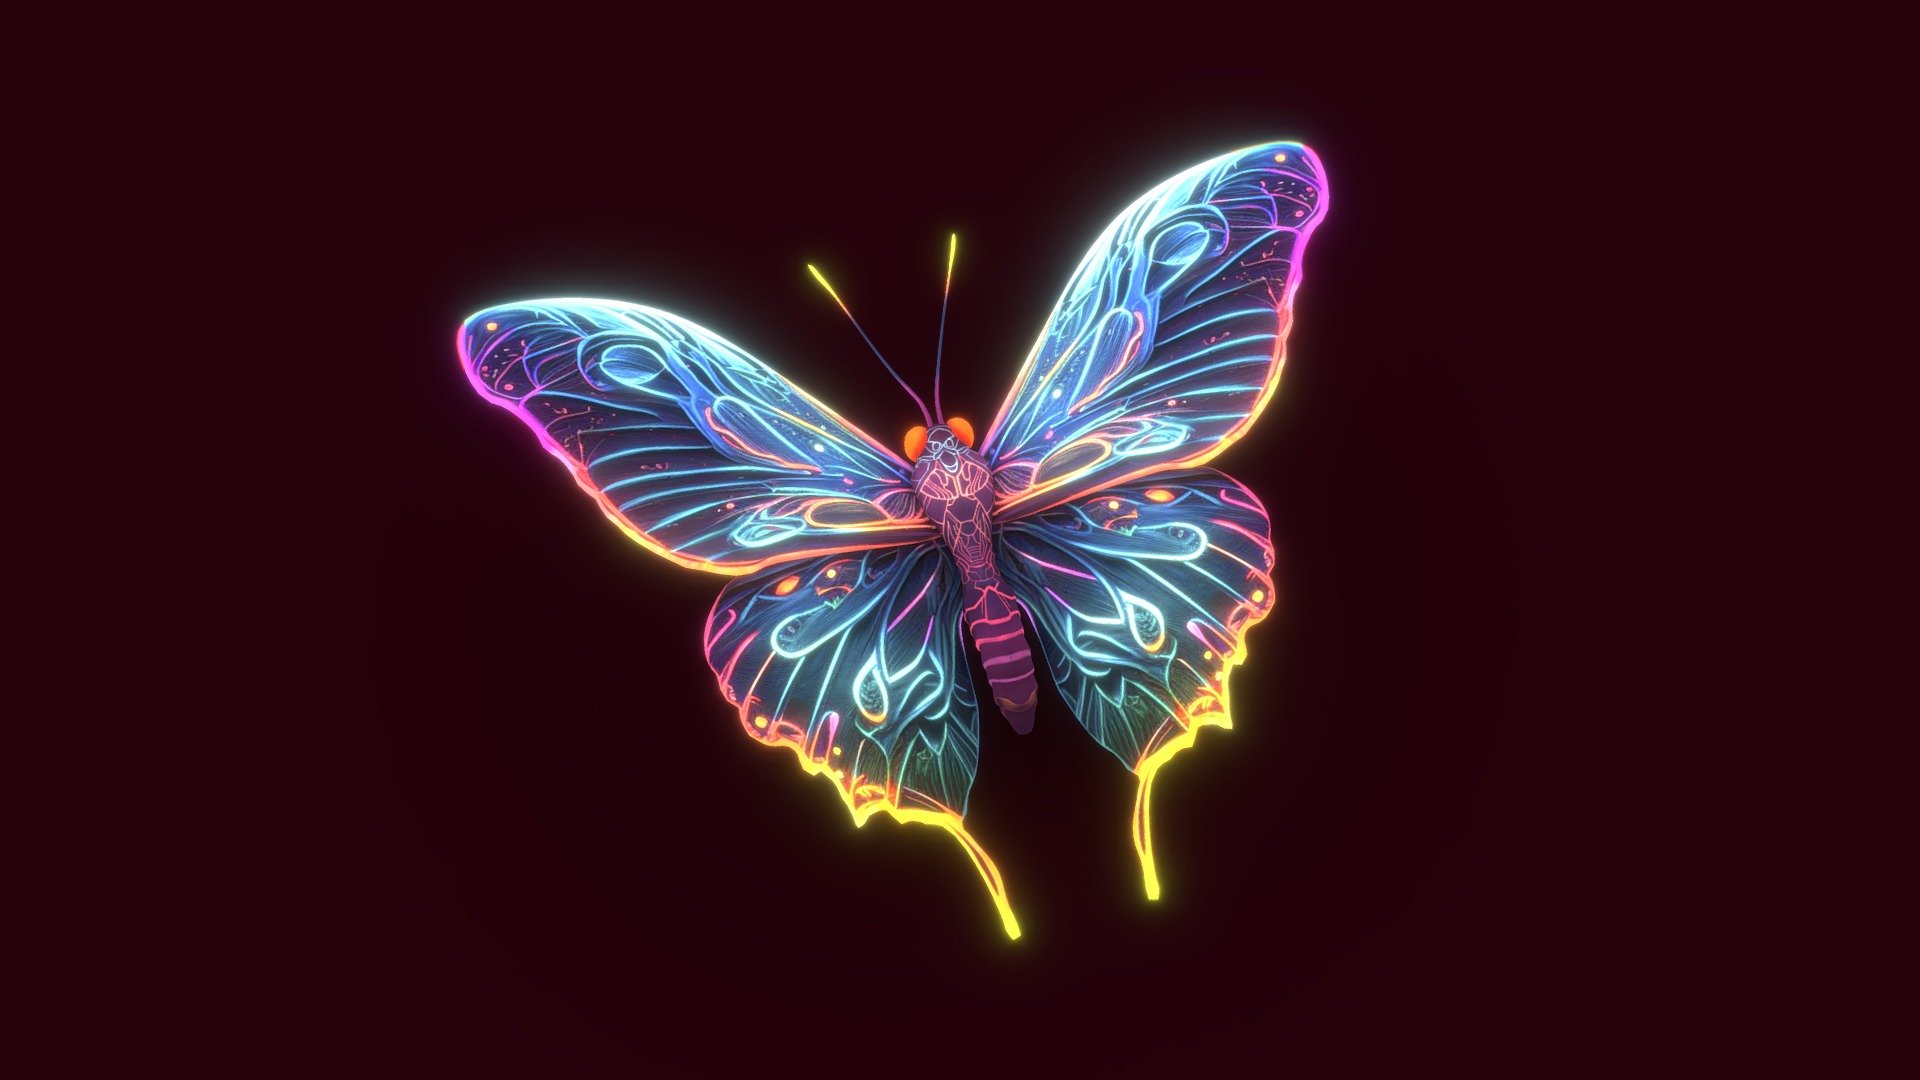 I sincerely hope you enjoy the stunning neon butterfly, which I spent more time on in the still unfinished painting process than on creating the final model itself 3d model